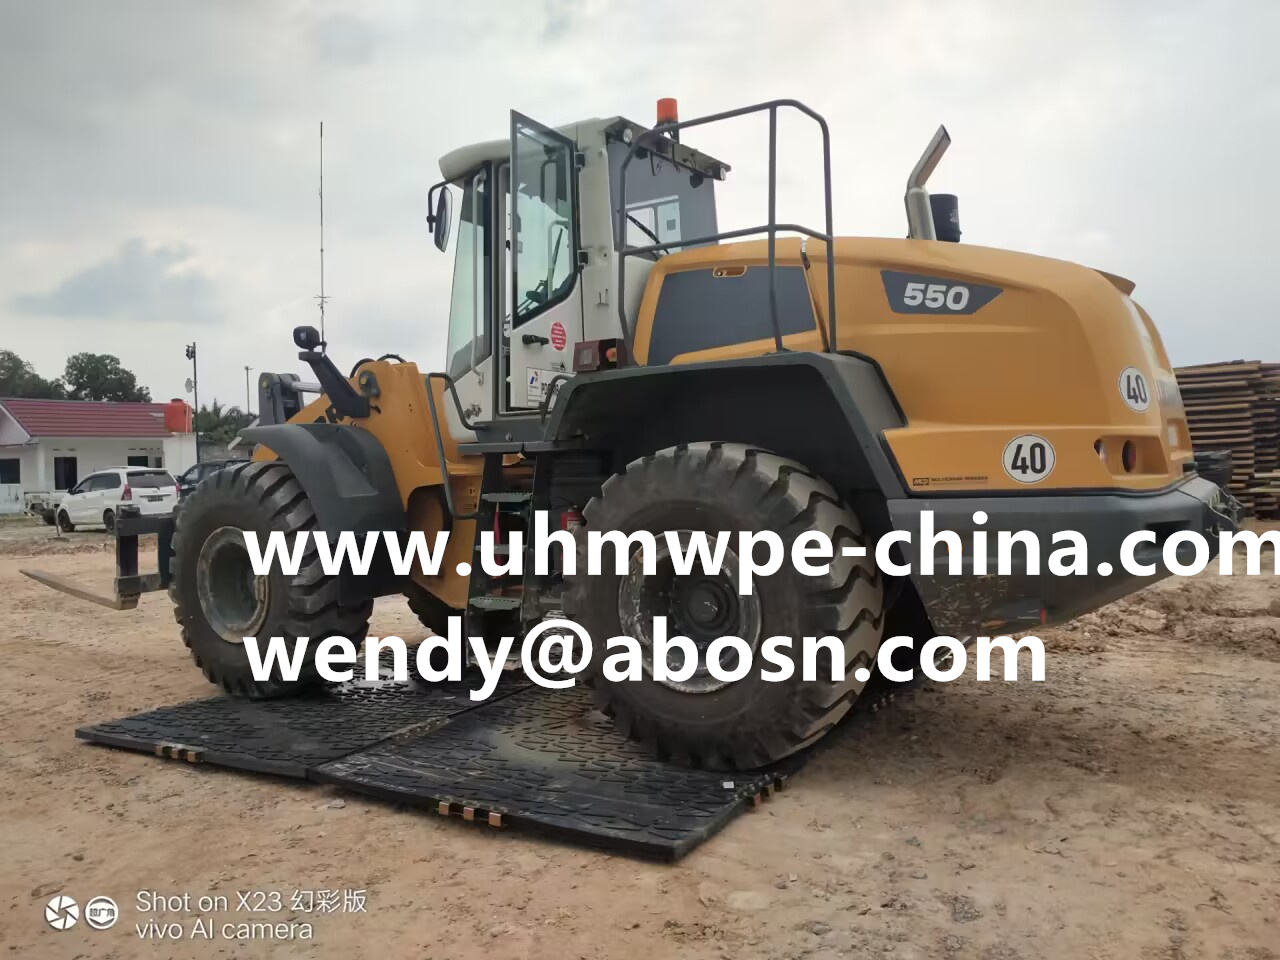 Construction Road Mat Tests Well in Indonesia for Mining Temporary Road